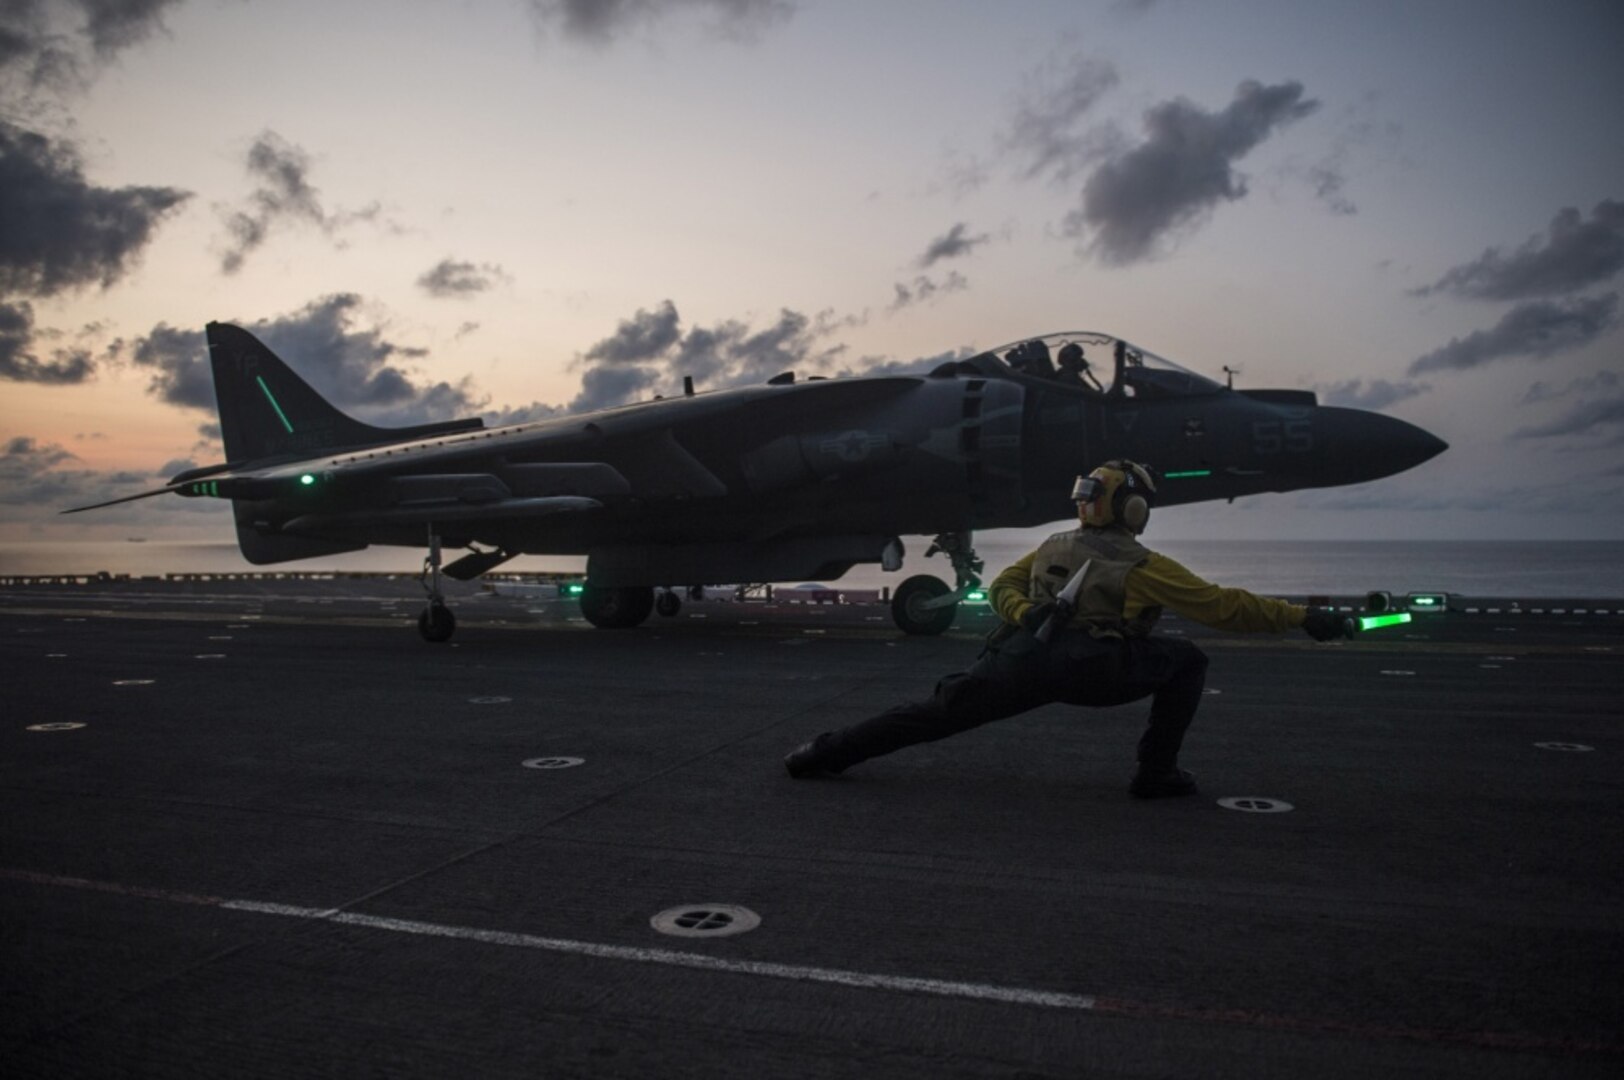 Aviation Boatswain™s Mate (Handling) 2nd Class Morgan Jackson, from Los Angeles, gives the signal for an AV-8B Harrier, assigned to the Ridge Runners of Marine Medium Tiltrotor Squadron (VMM) 163, to take off from the flight deck of the amphibious assault ship USS Makin Island (LHD 8), April 12, 2017. Makin Island, the flagship for the Makin Island Amphibious Ready Group, with the embarked 11th Marine Expeditionary Unit, is operating in the Indo-Asia-Pacific region to enhance amphibious capability with regional partners and to serve as a ready-response force for any type of contingency. 